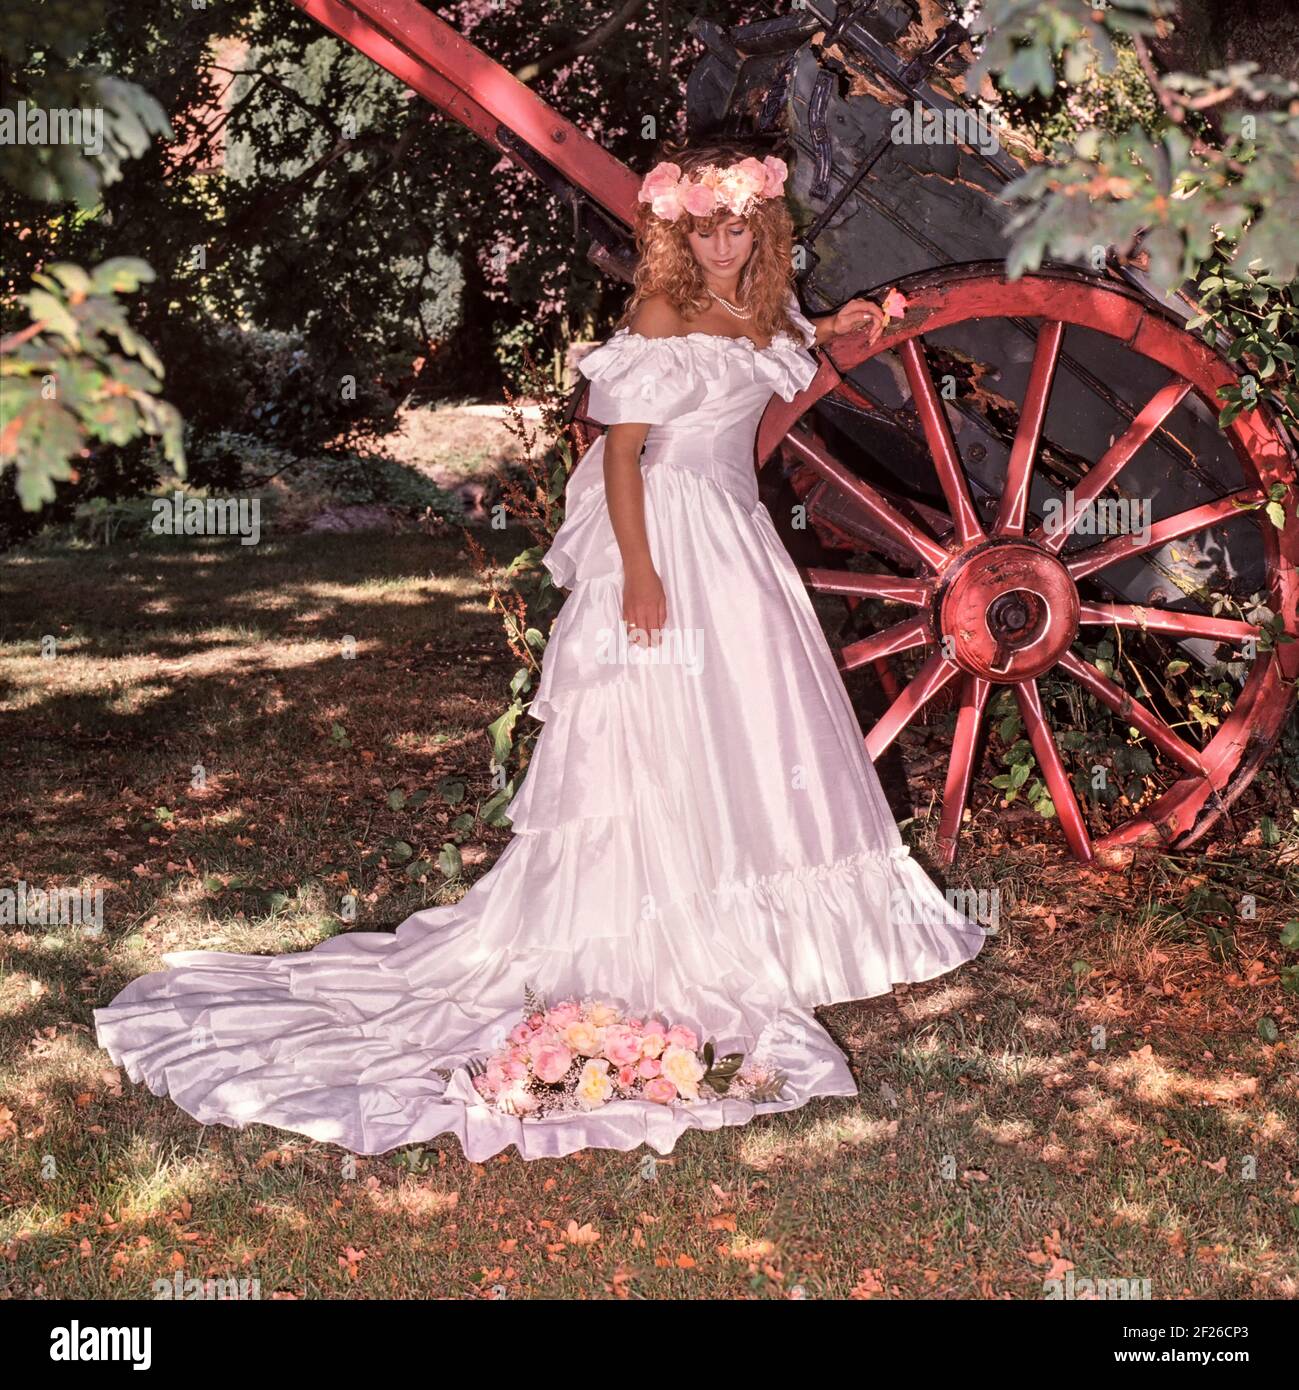 1980s historical archive view of 1989 young model released bride posing for photograph outdoors beside cartwheel prop wearing full length off the shoulder 80s wedding dress and train in colour photo with bouquet & matching headdress archival fashion image of the way we were in 1900s Essex England UK Stock Photo